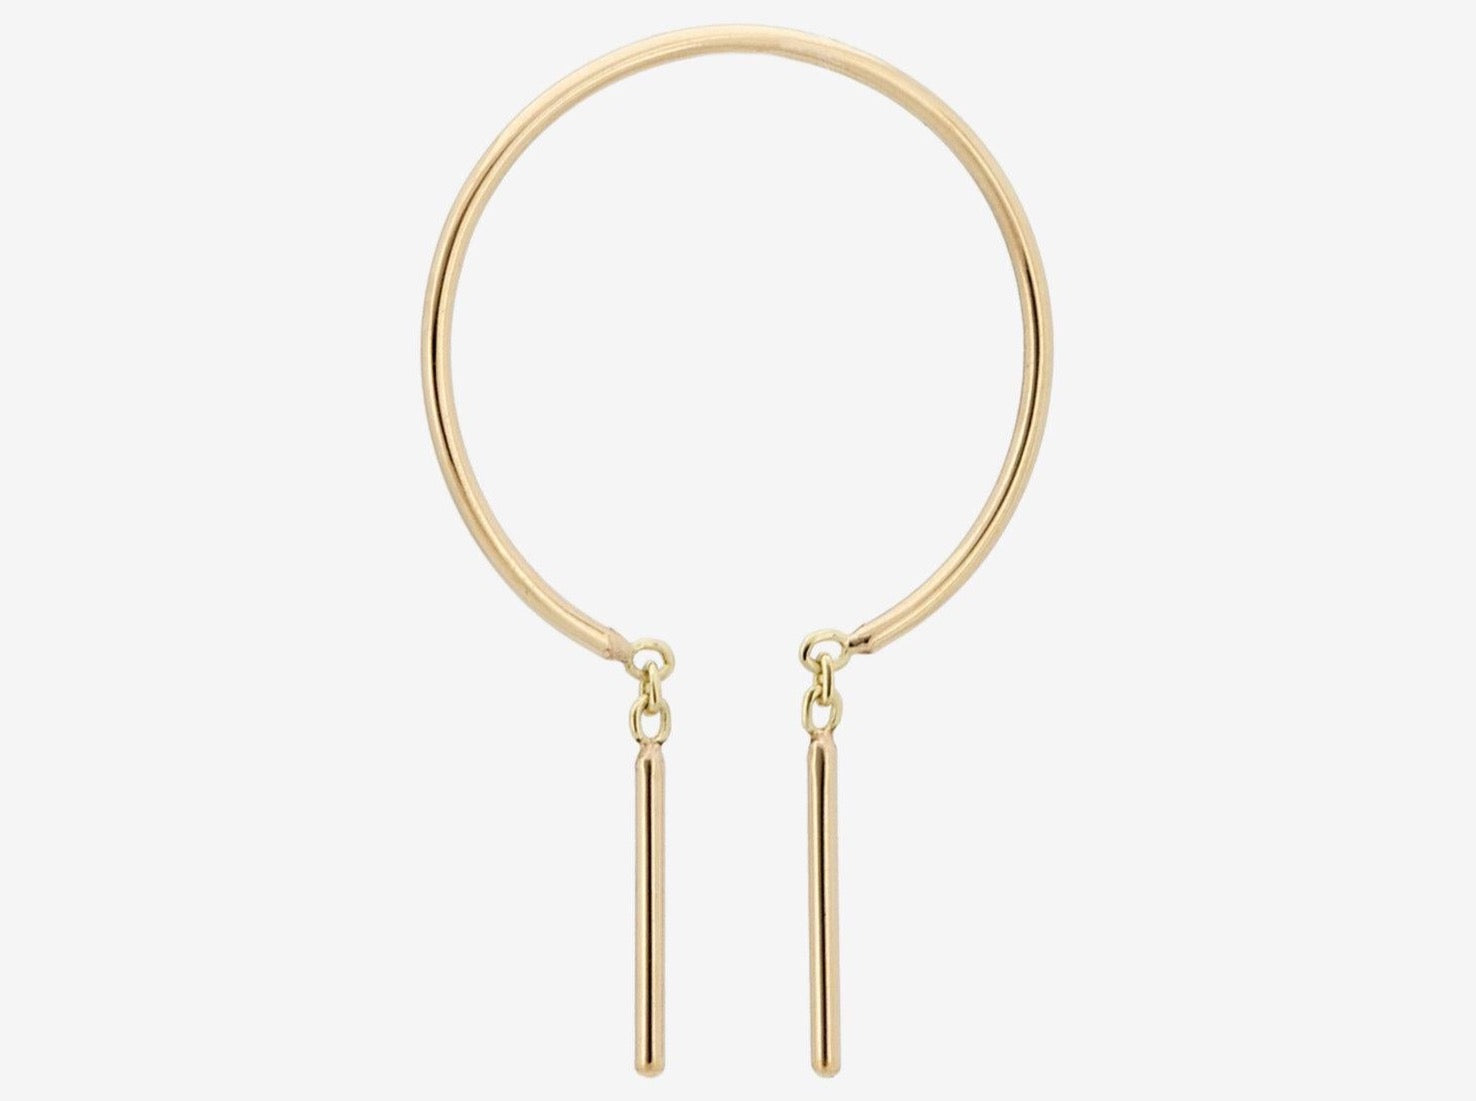 Chime Hoop Earring in 14k Yellow Gold by Jack + G